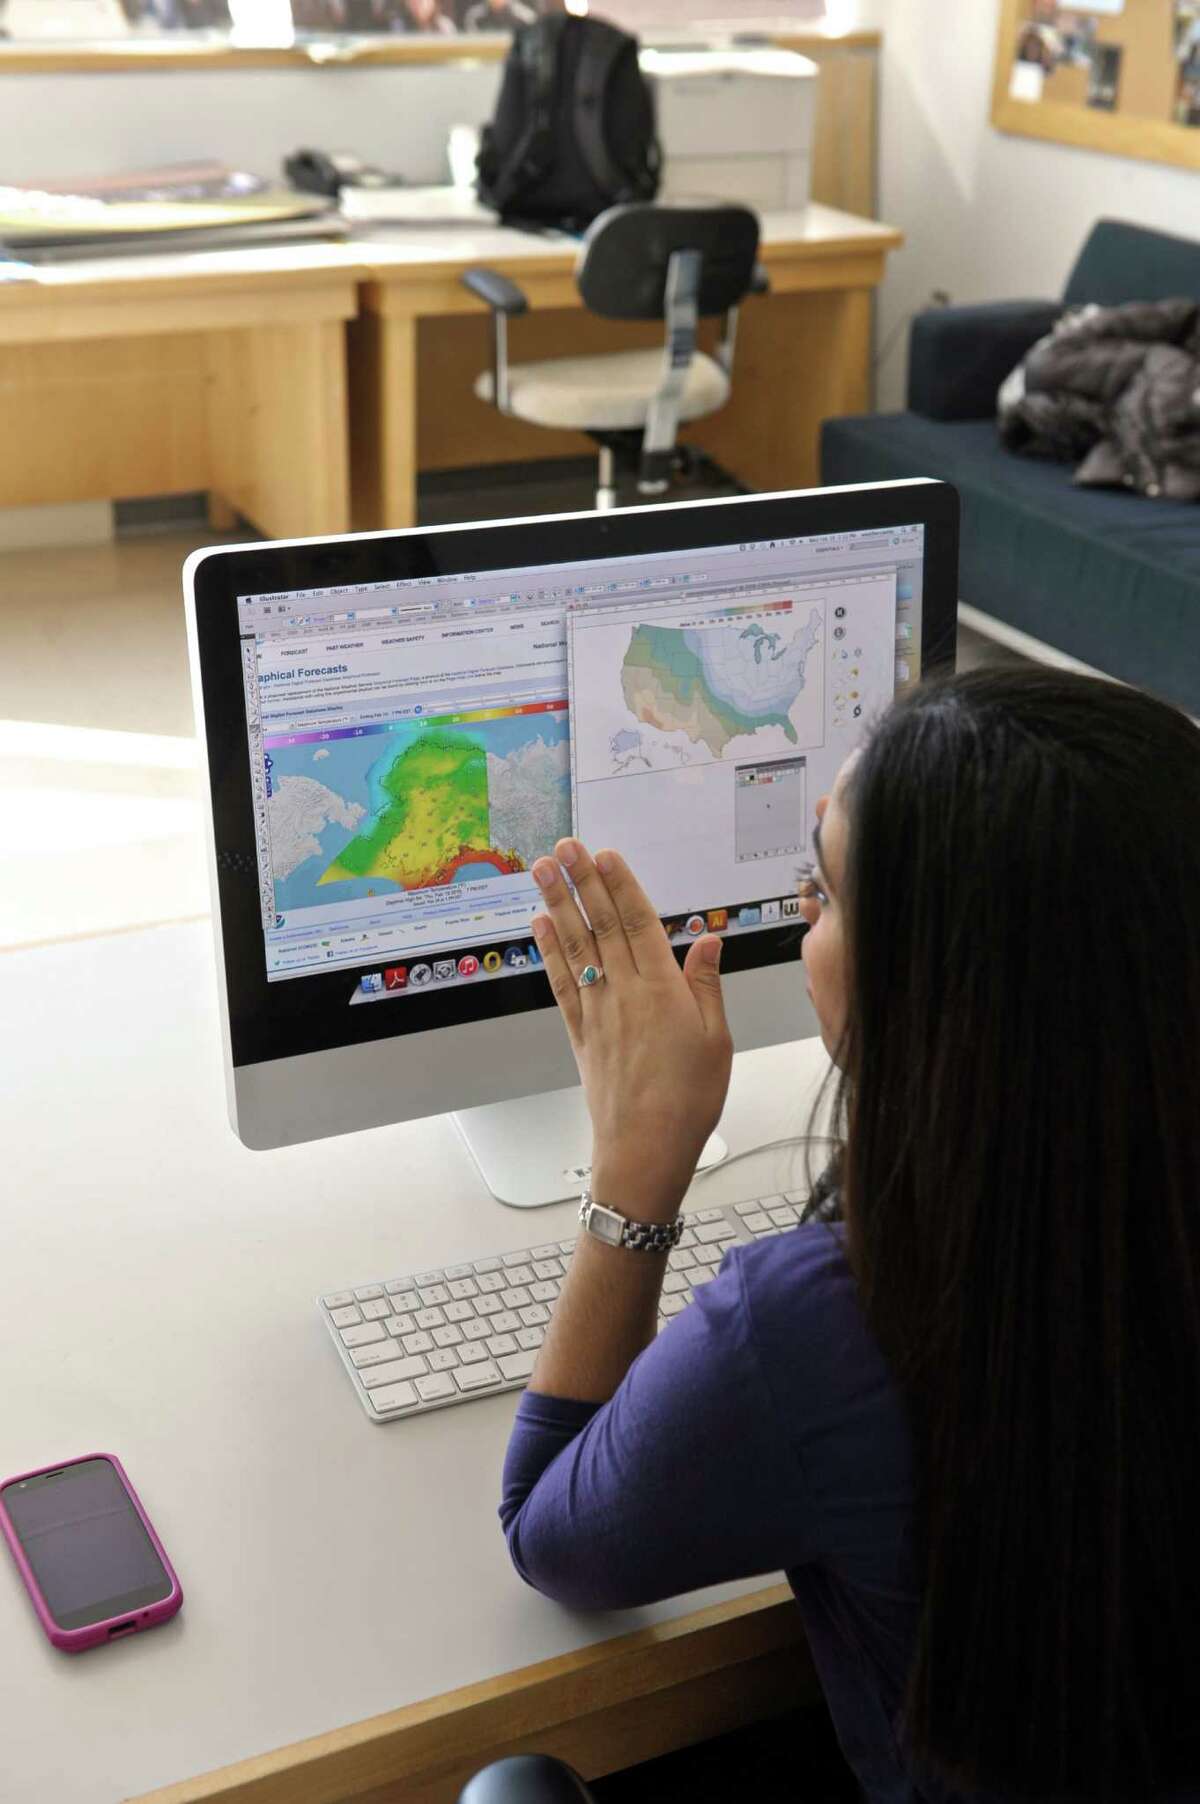 Ana Cabrera, a second semester freshman in the Meteoroligical Studies program at Western Connecticut State University creates weather maps for newspapers in the WCSU Weather Center, on Wednesday, February 18, 2015, in Danbury, Conn.